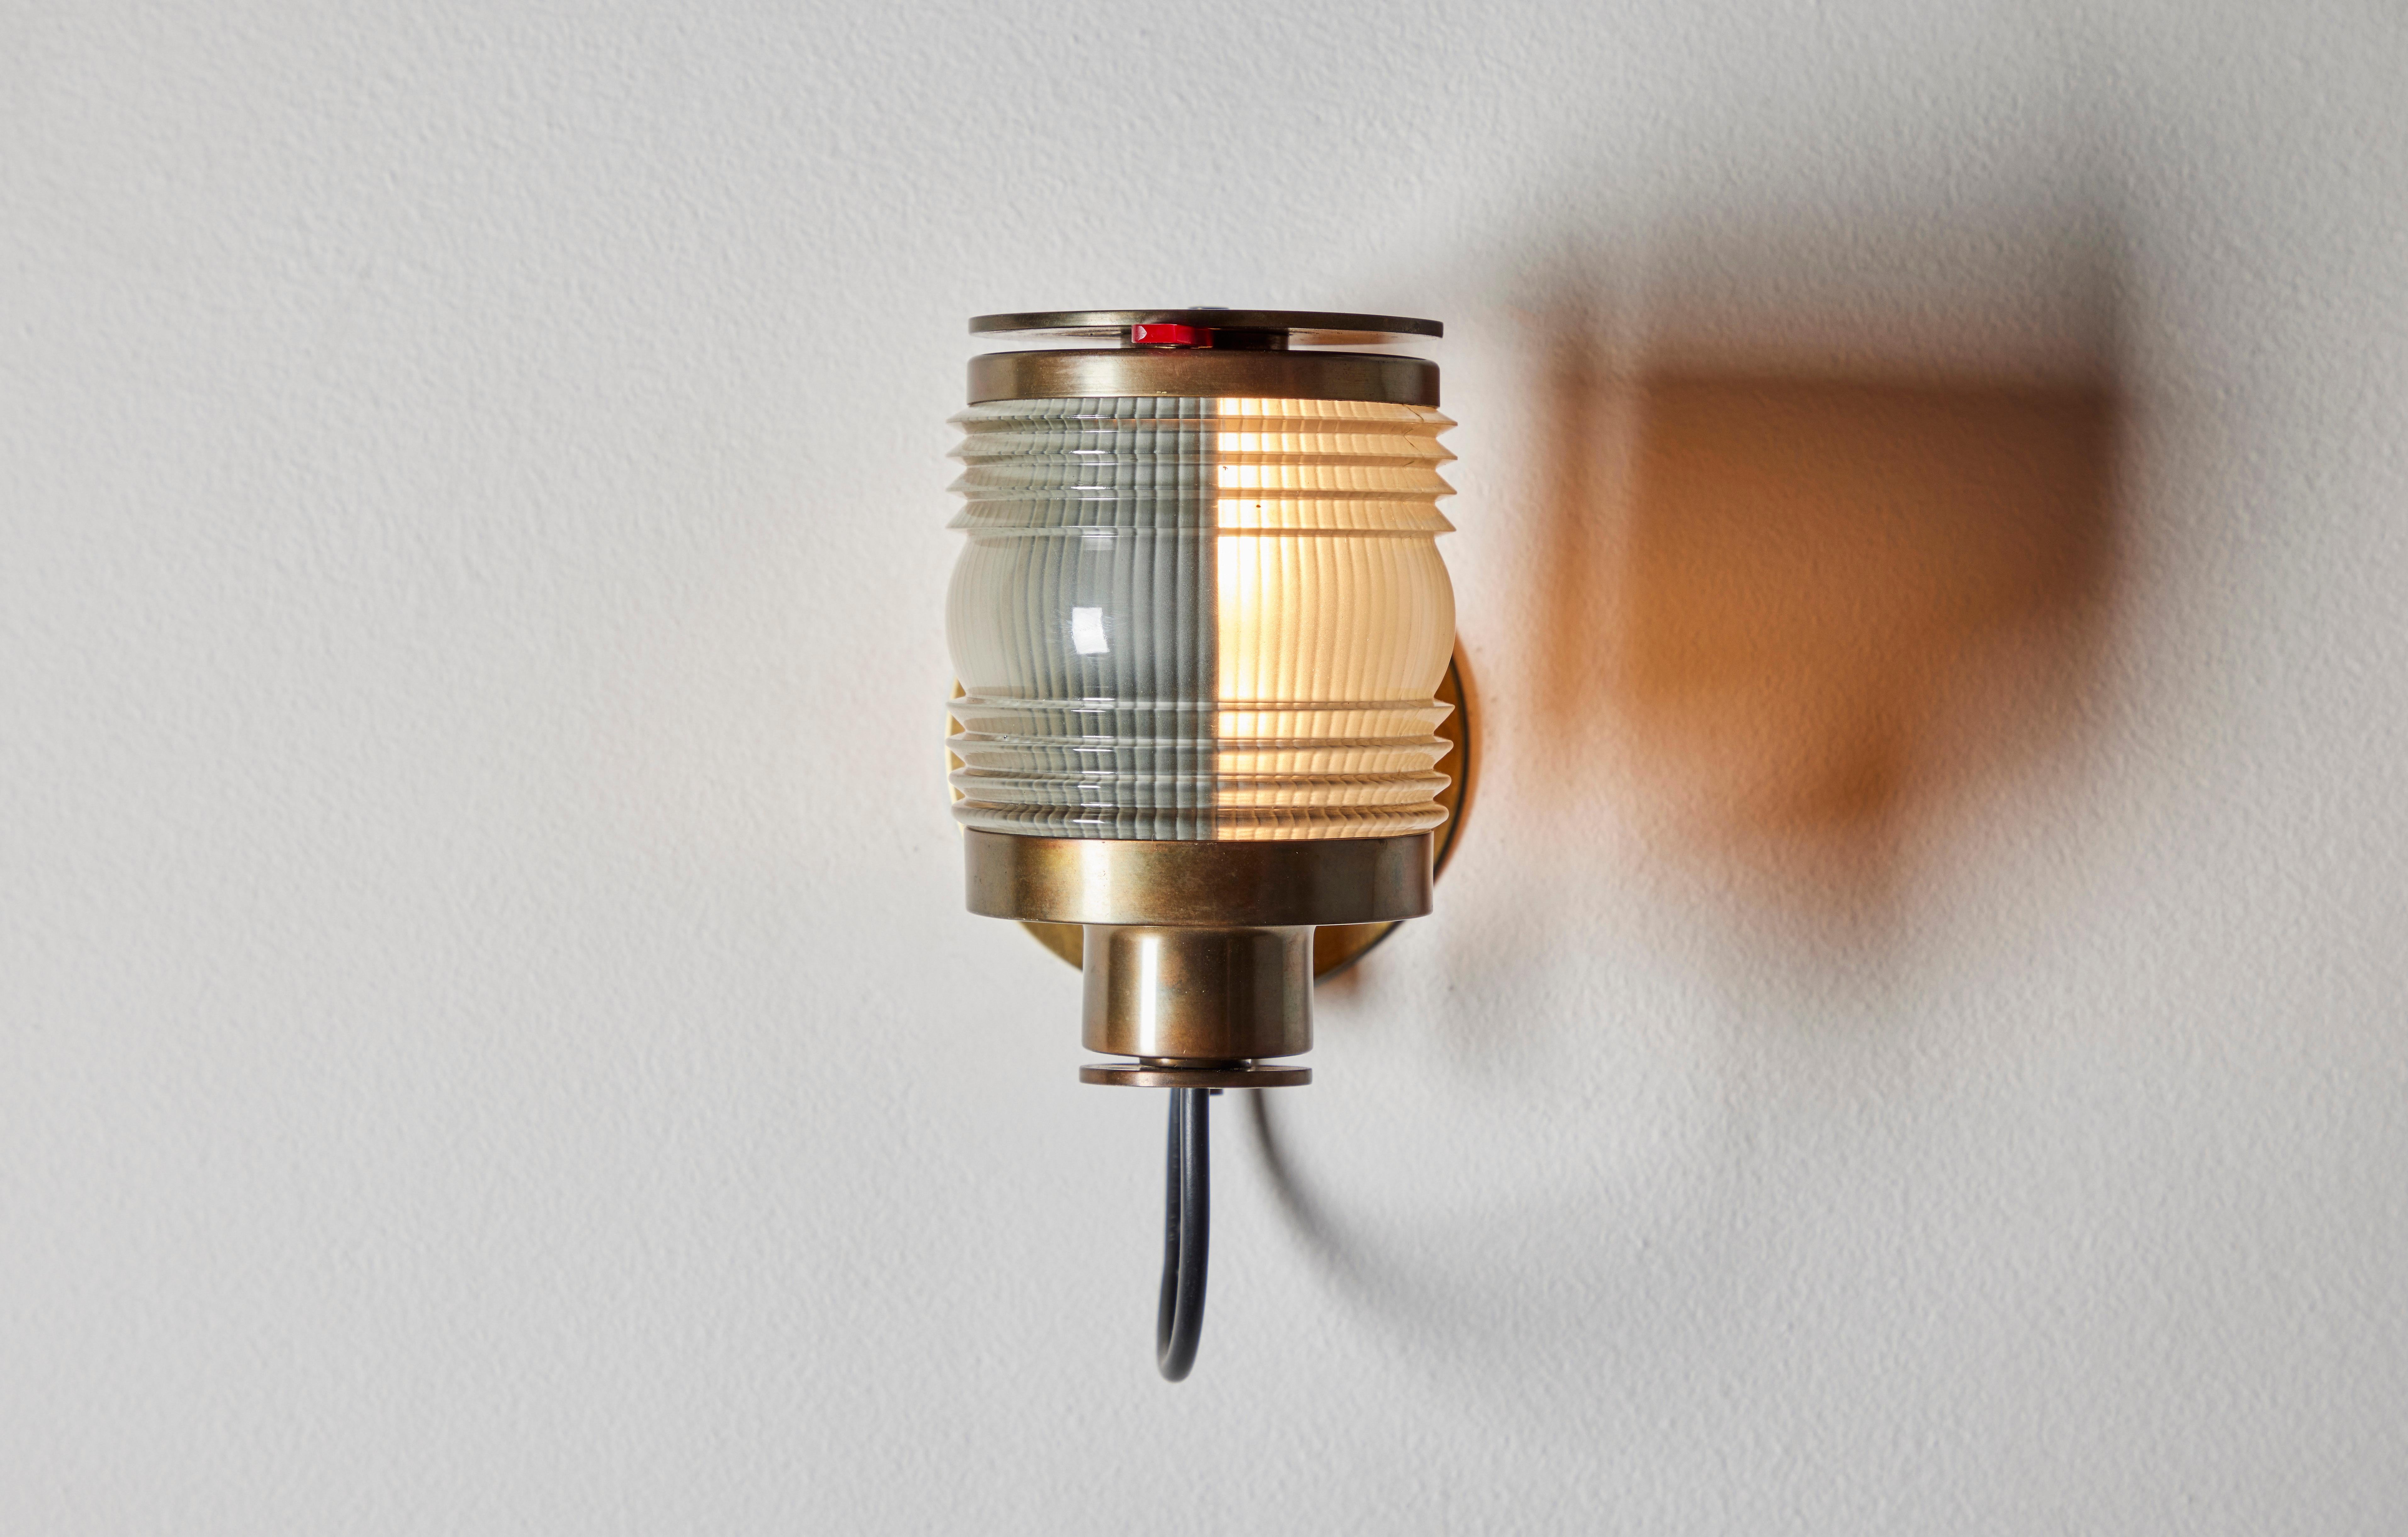 Rare Model 1138 single sconce by Joe Colombo. Designed and manufactured in Italy, 1963. Glass, brass. Adjustable shutter for directional lighting. Rewired for U.S junction boxes. We recommend one E14 40w maximum bulb. Bulb not included.